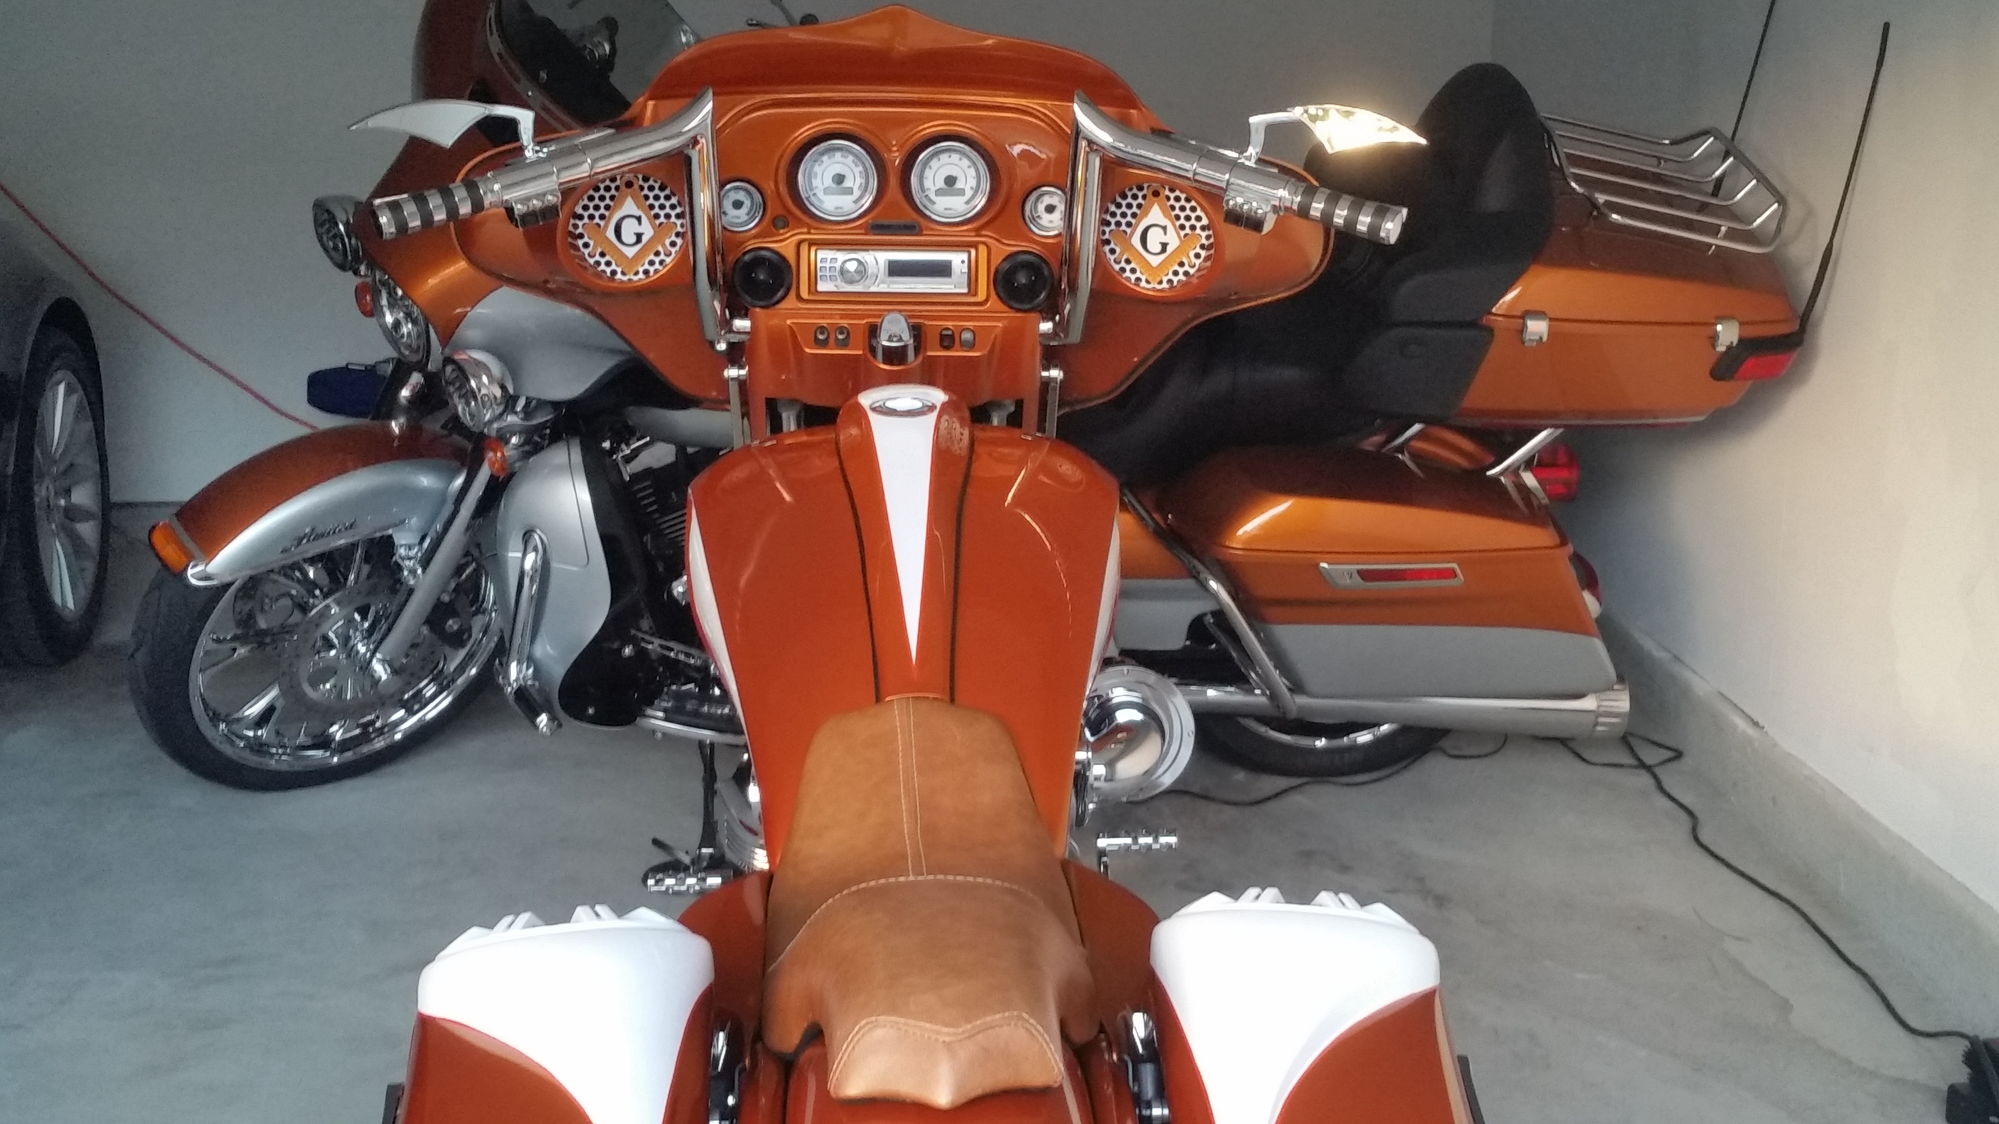 10" or 12" Ape Hangers on a 09 Street Glide - Page 2 - Harley Davidson